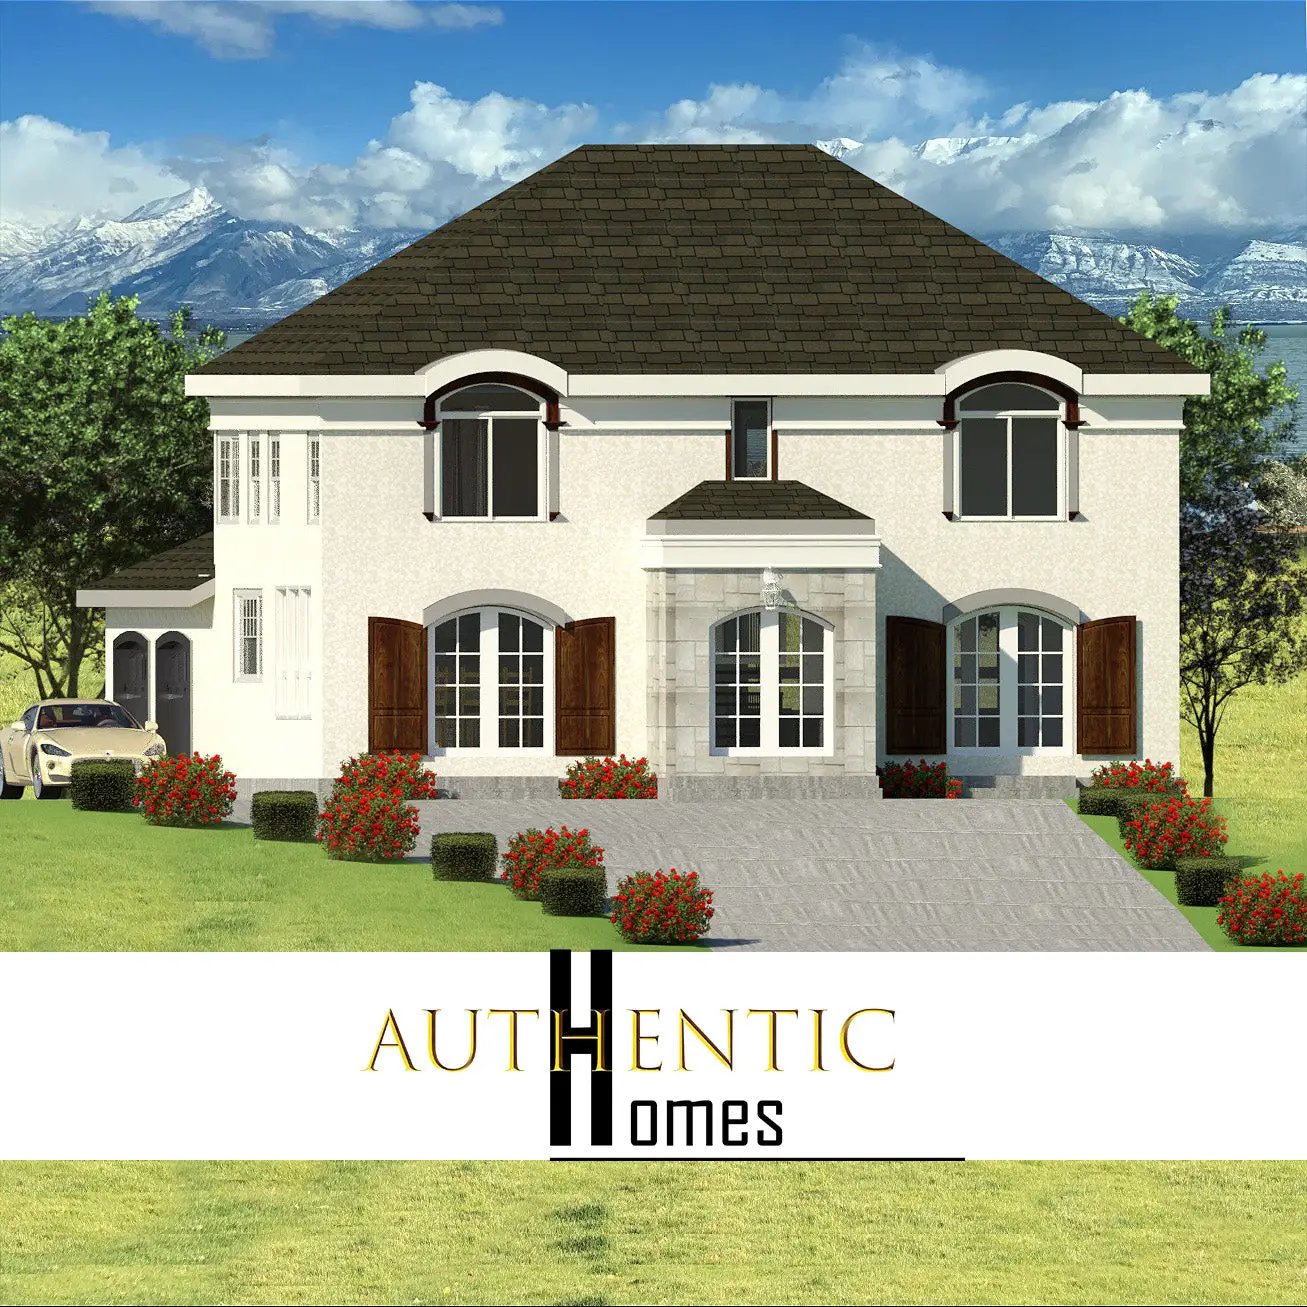 French style house plan wiith white stucco and french doors